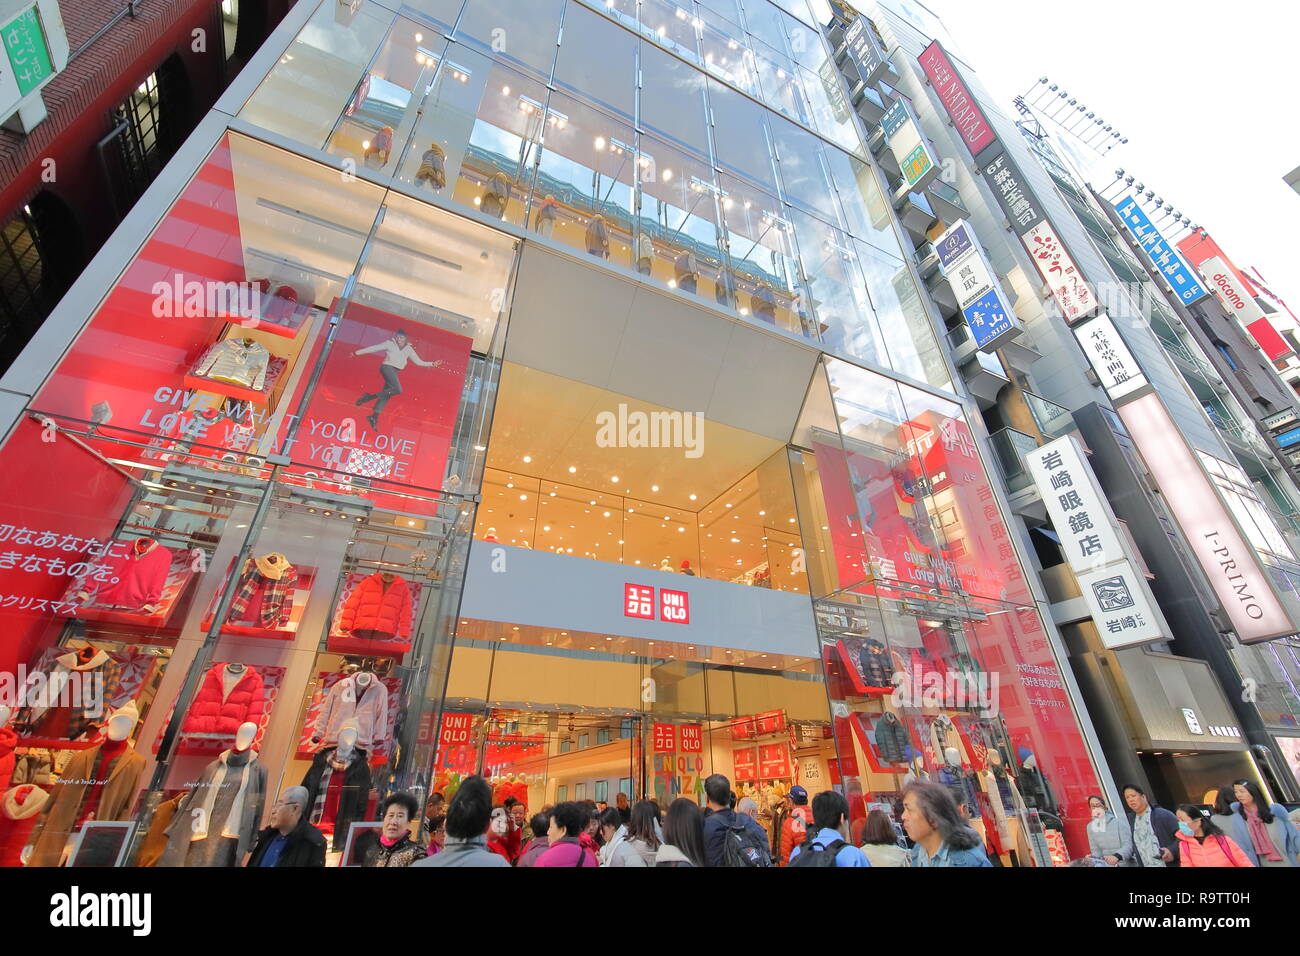 People visit Uniqlo shop in Ginza Tokyo Japan Stock Photo - Alamy